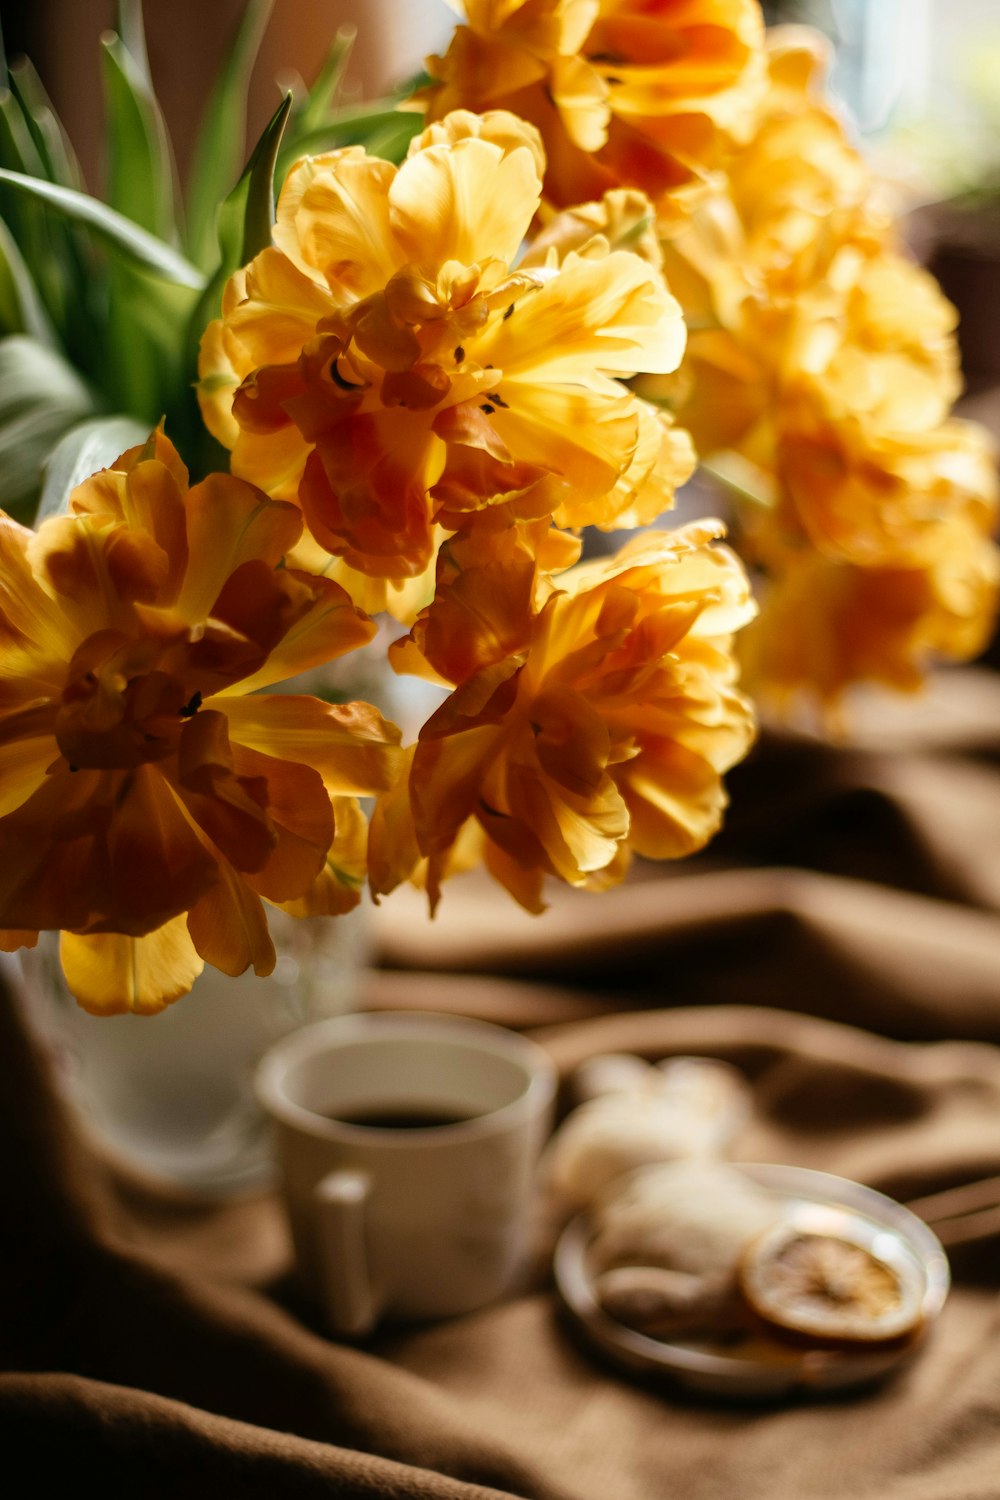 a vase filled with yellow flowers next to a cup of coffee